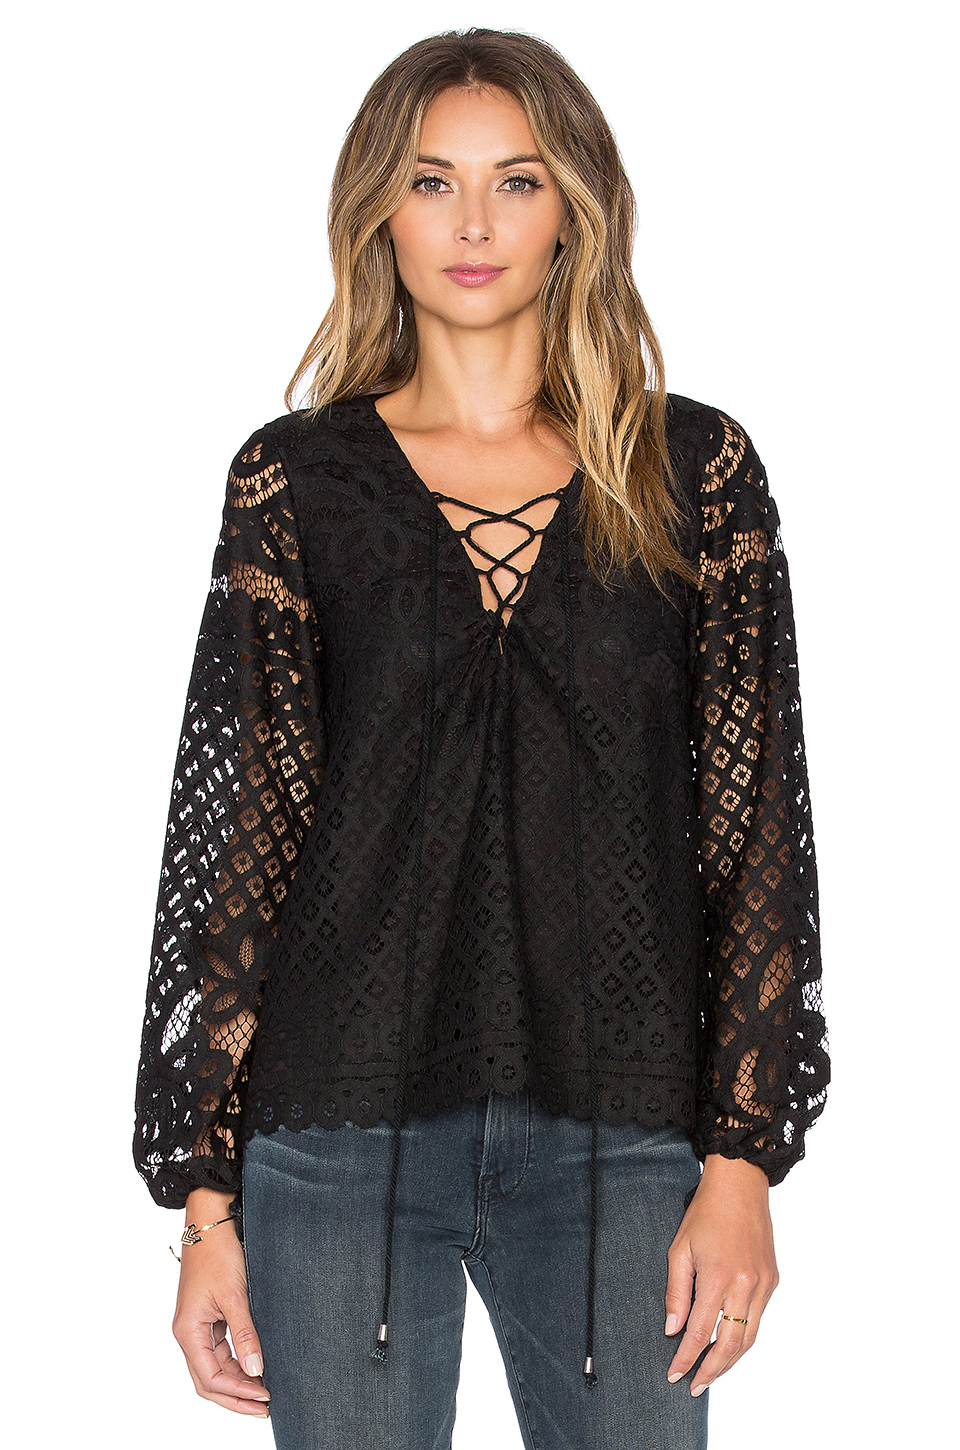 Tularosa X Revolve Lace Up Blouse in Black - Lyst